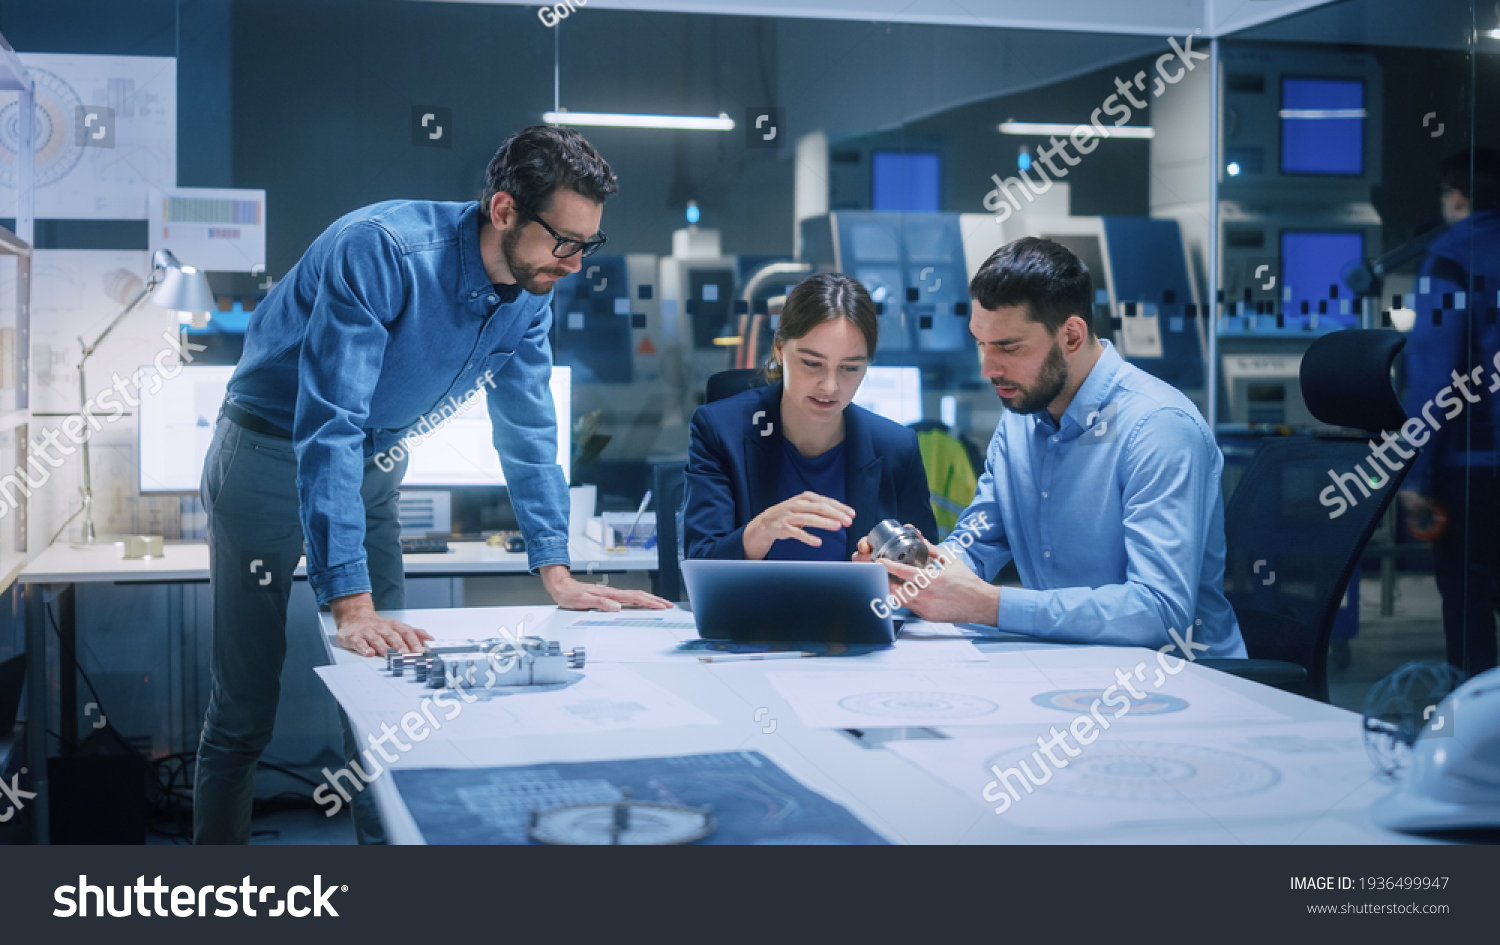 Factory Office Meeting Room: Team of Engineers Gather Around Conference Table, They Discuss Project Blueprints, Inspect Mechanism, Find Solutions, Use Laptop. Industrial Technology Factory #1936499947